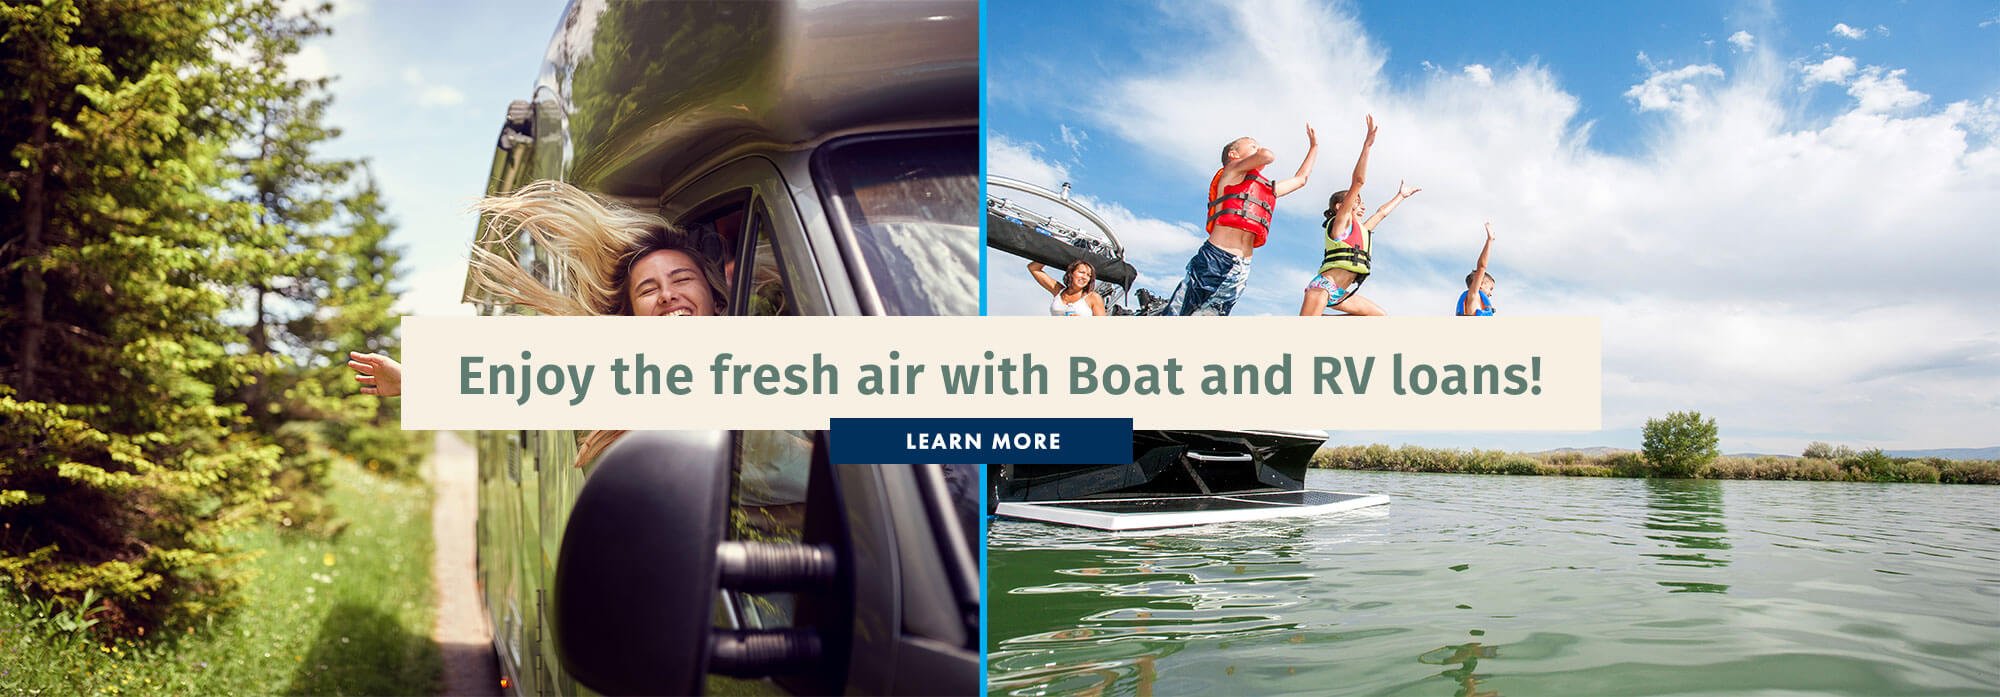 Enjoy the fresh air with RV and Boat Loans!